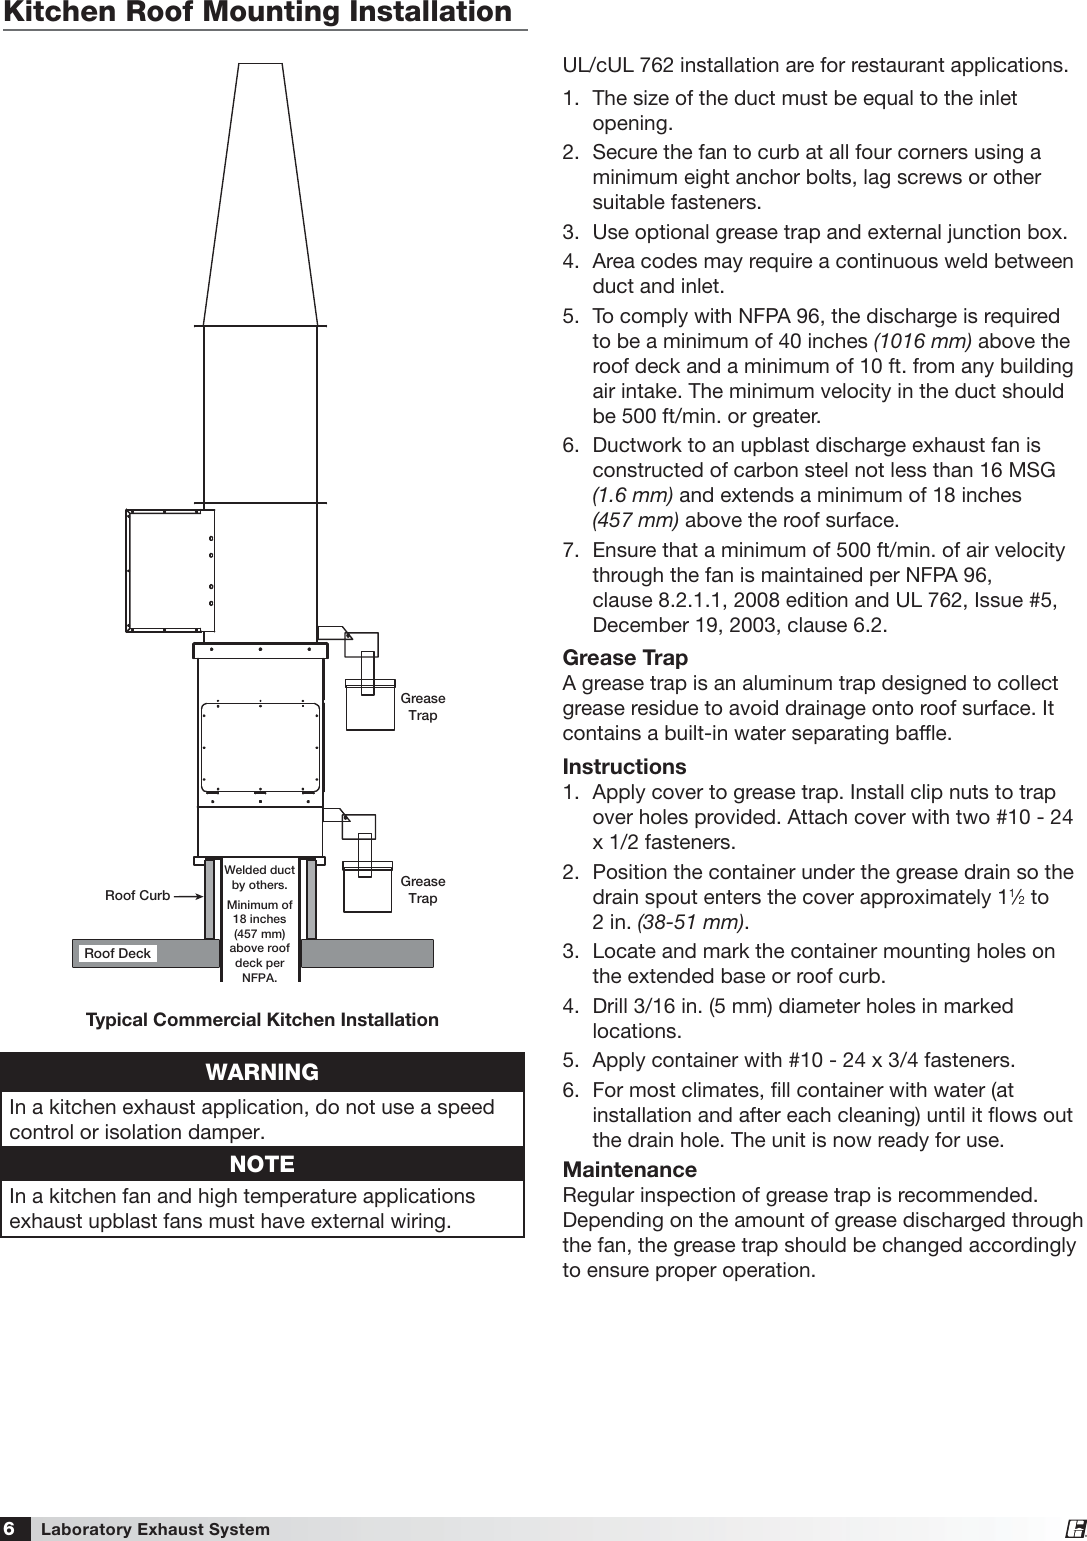 Page 6 of 12 - Greenheck-Fan Greenheck-Fan-Laboratory-Exhaust-System-Vektor-H-Users-Manual-  Greenheck-fan-laboratory-exhaust-system-vektor-h-users-manual